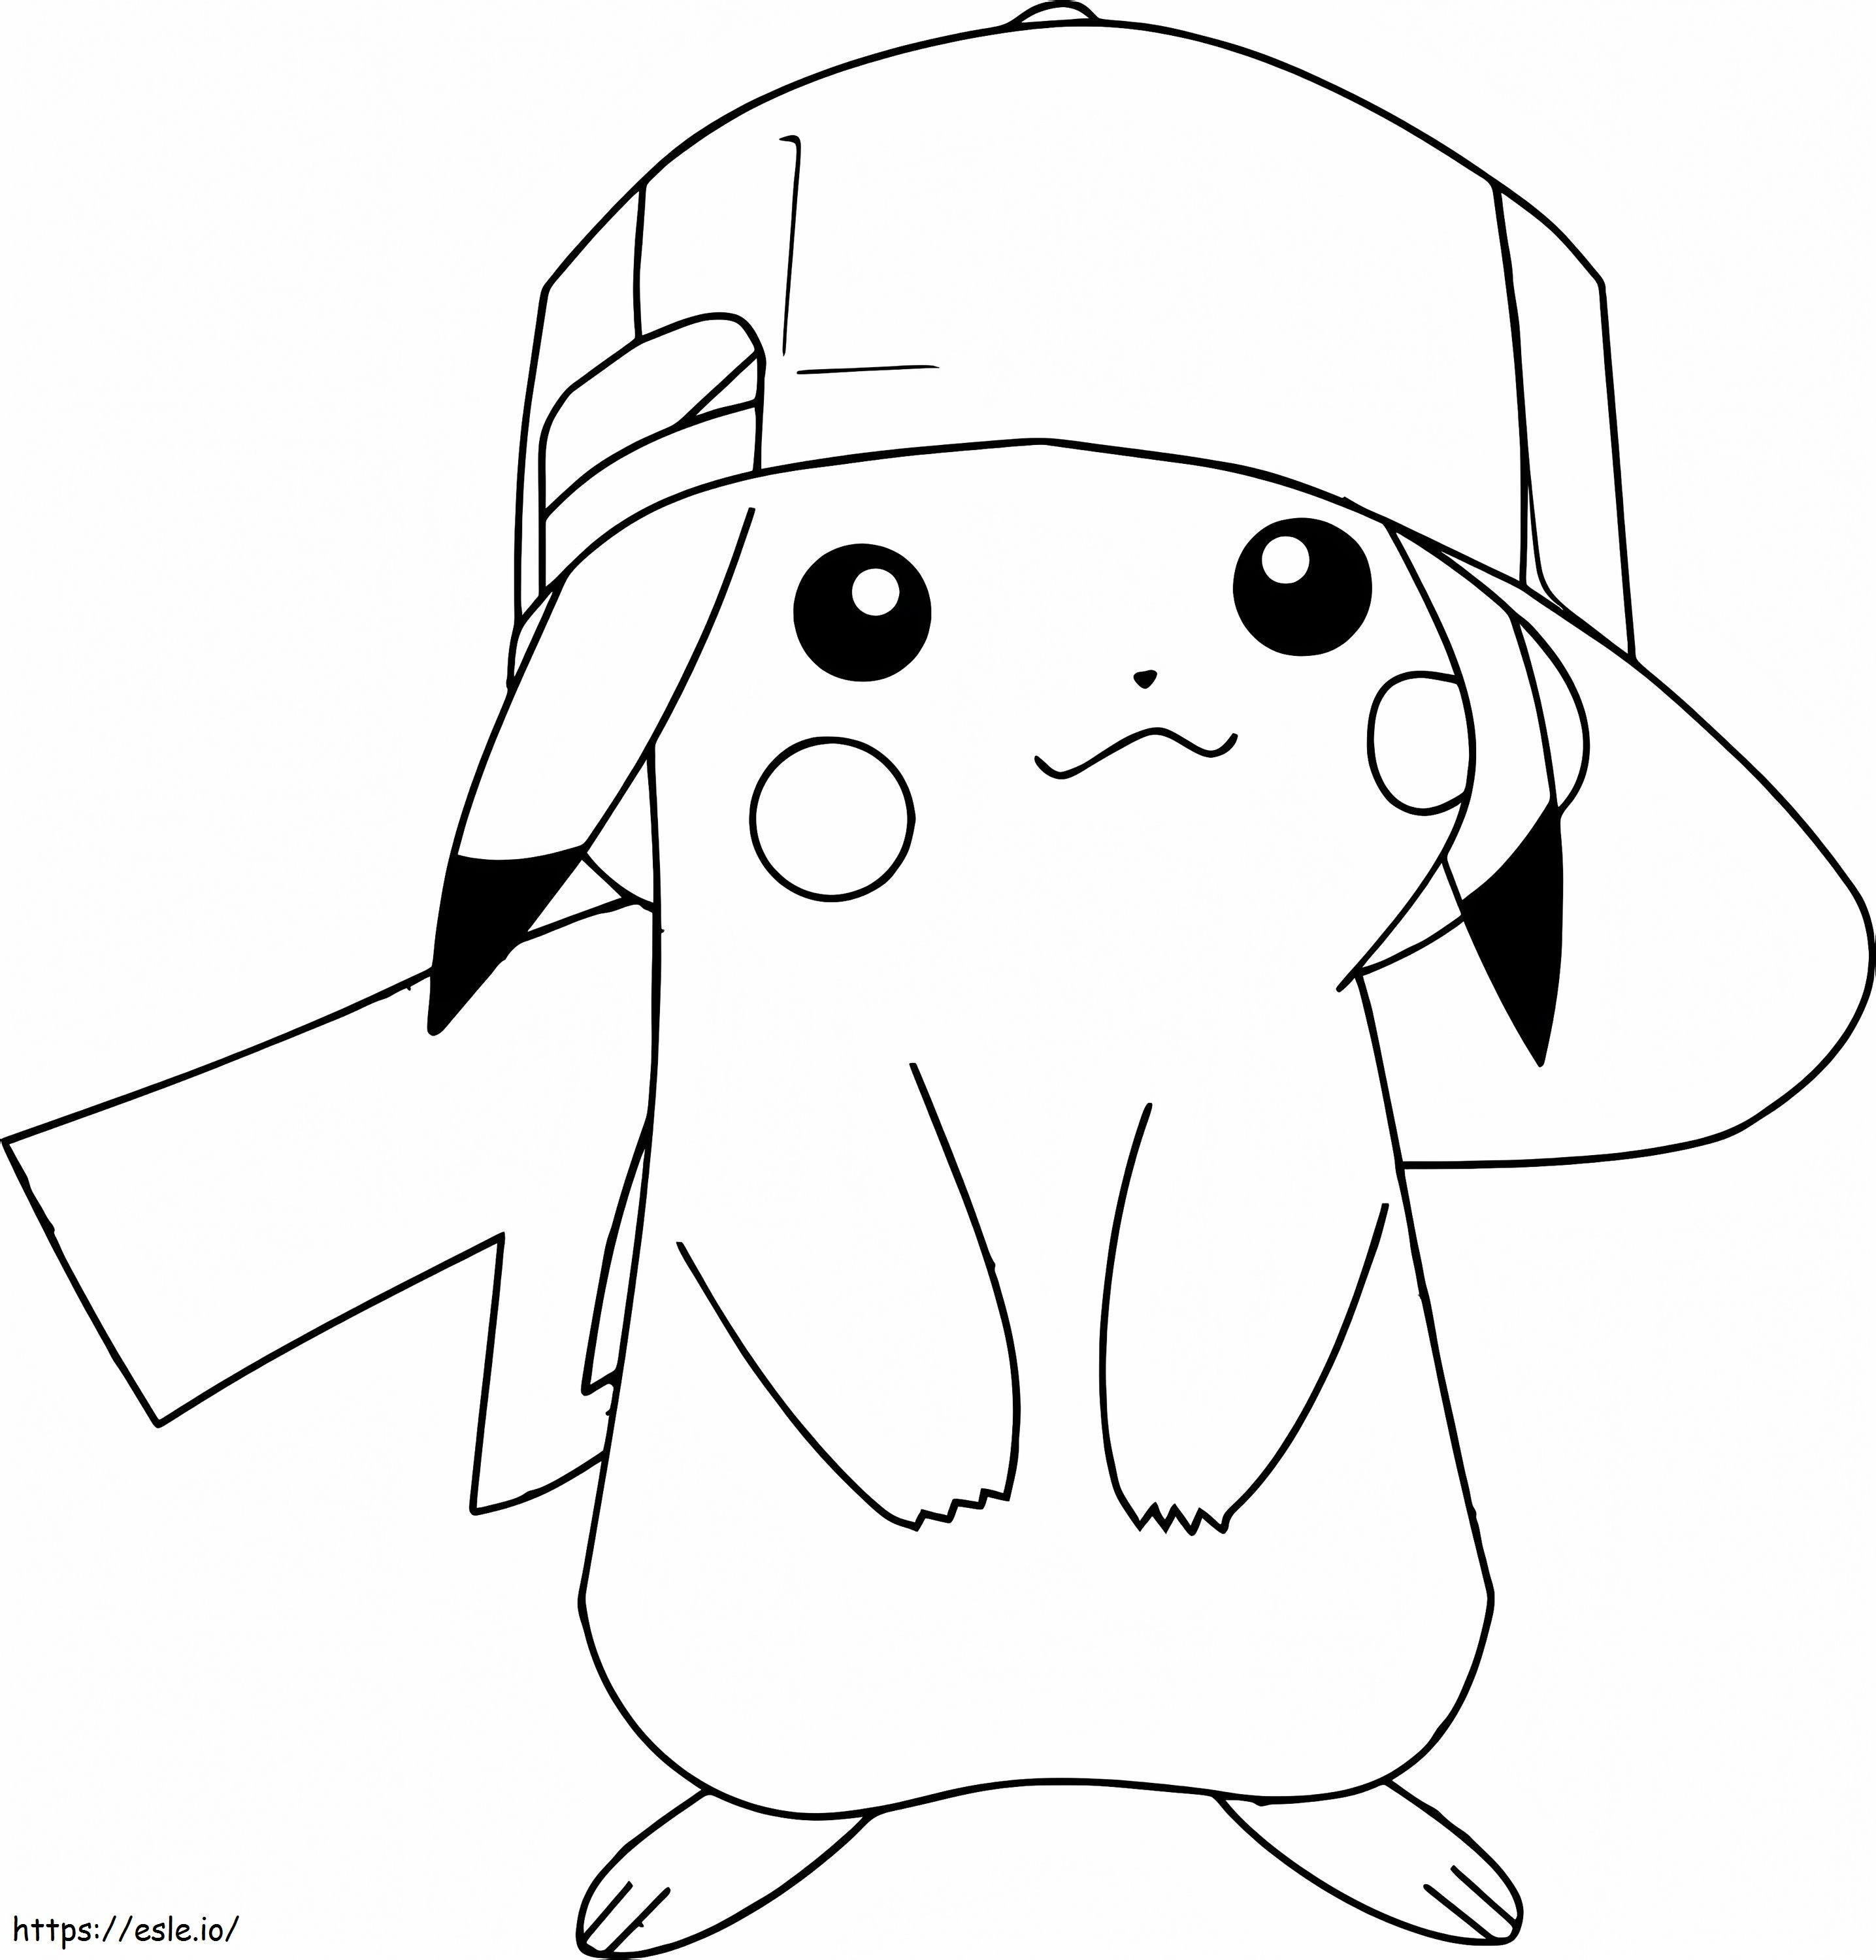 Pikachu Wearing A Cap coloring page